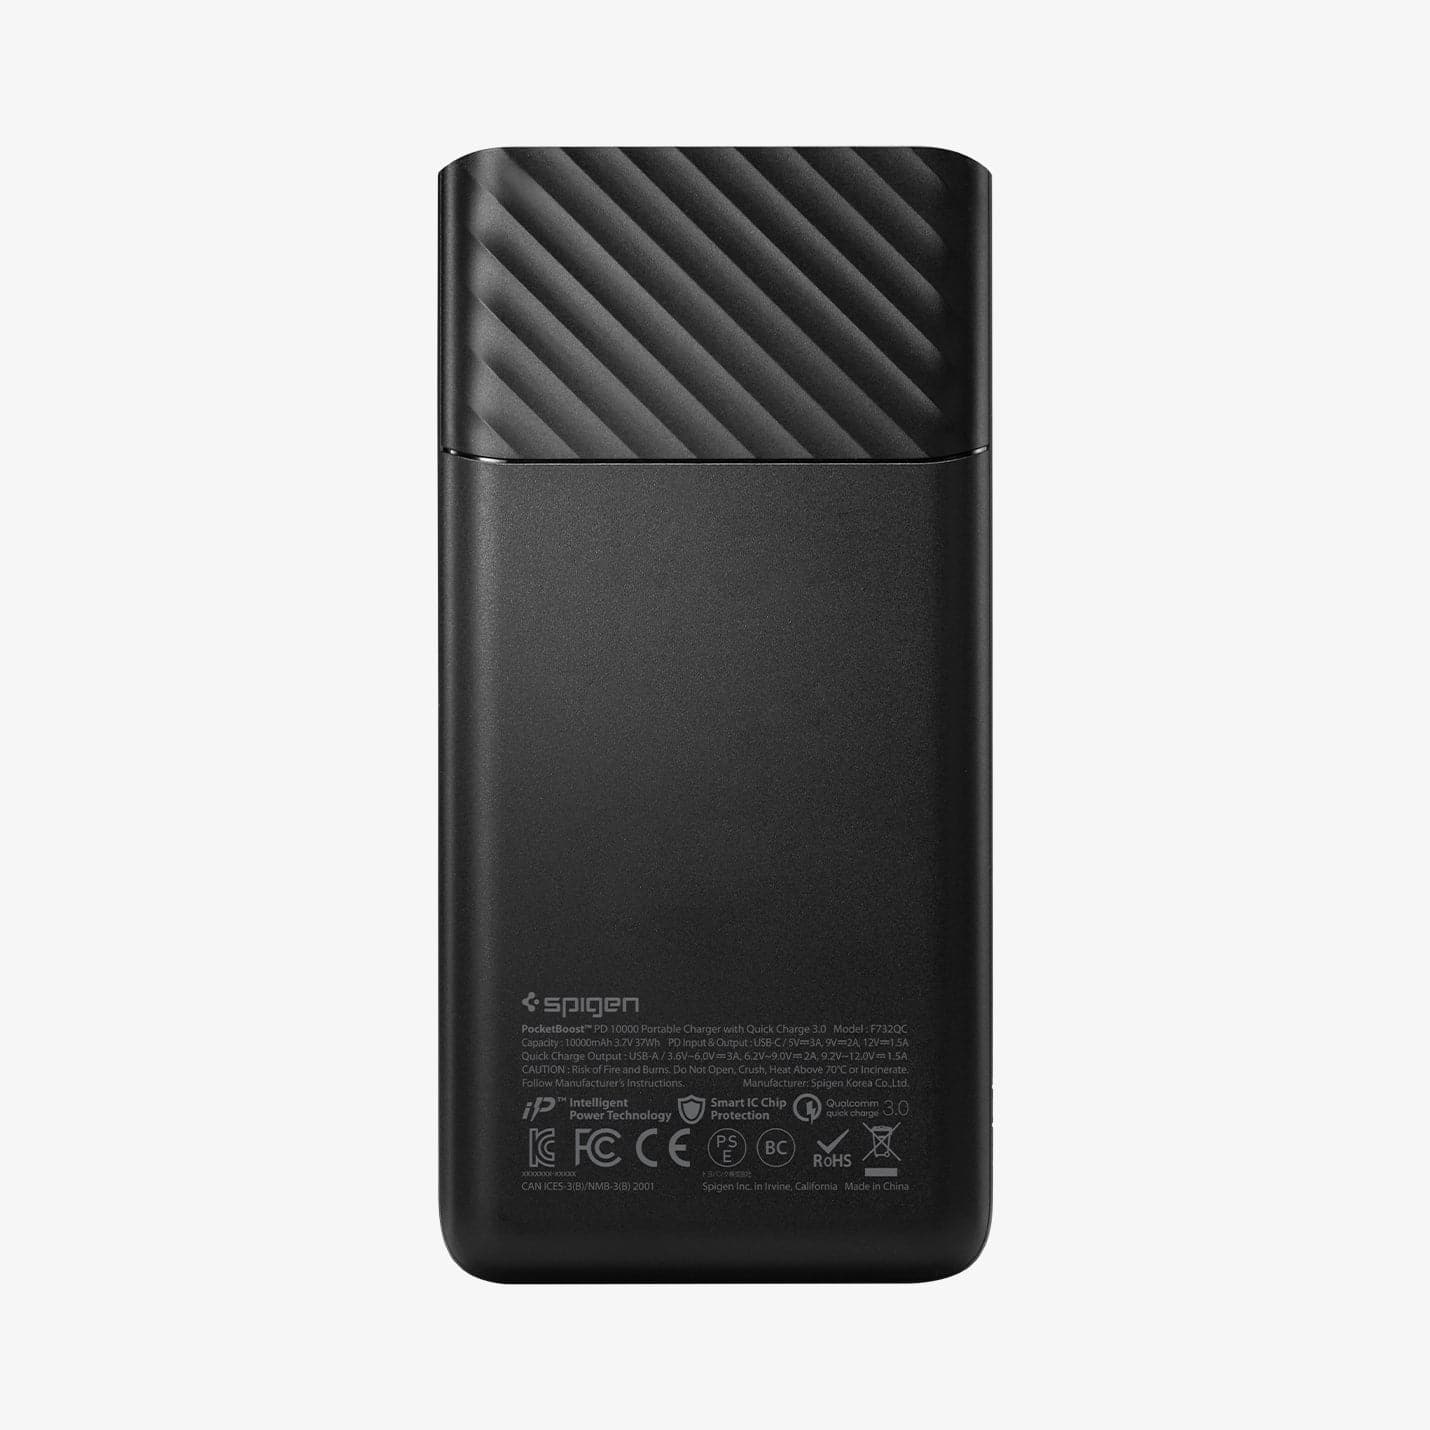 000BA26139 - PocketBoost™ 10,000mAh 18W Portable Charger F732QC in black showing the back